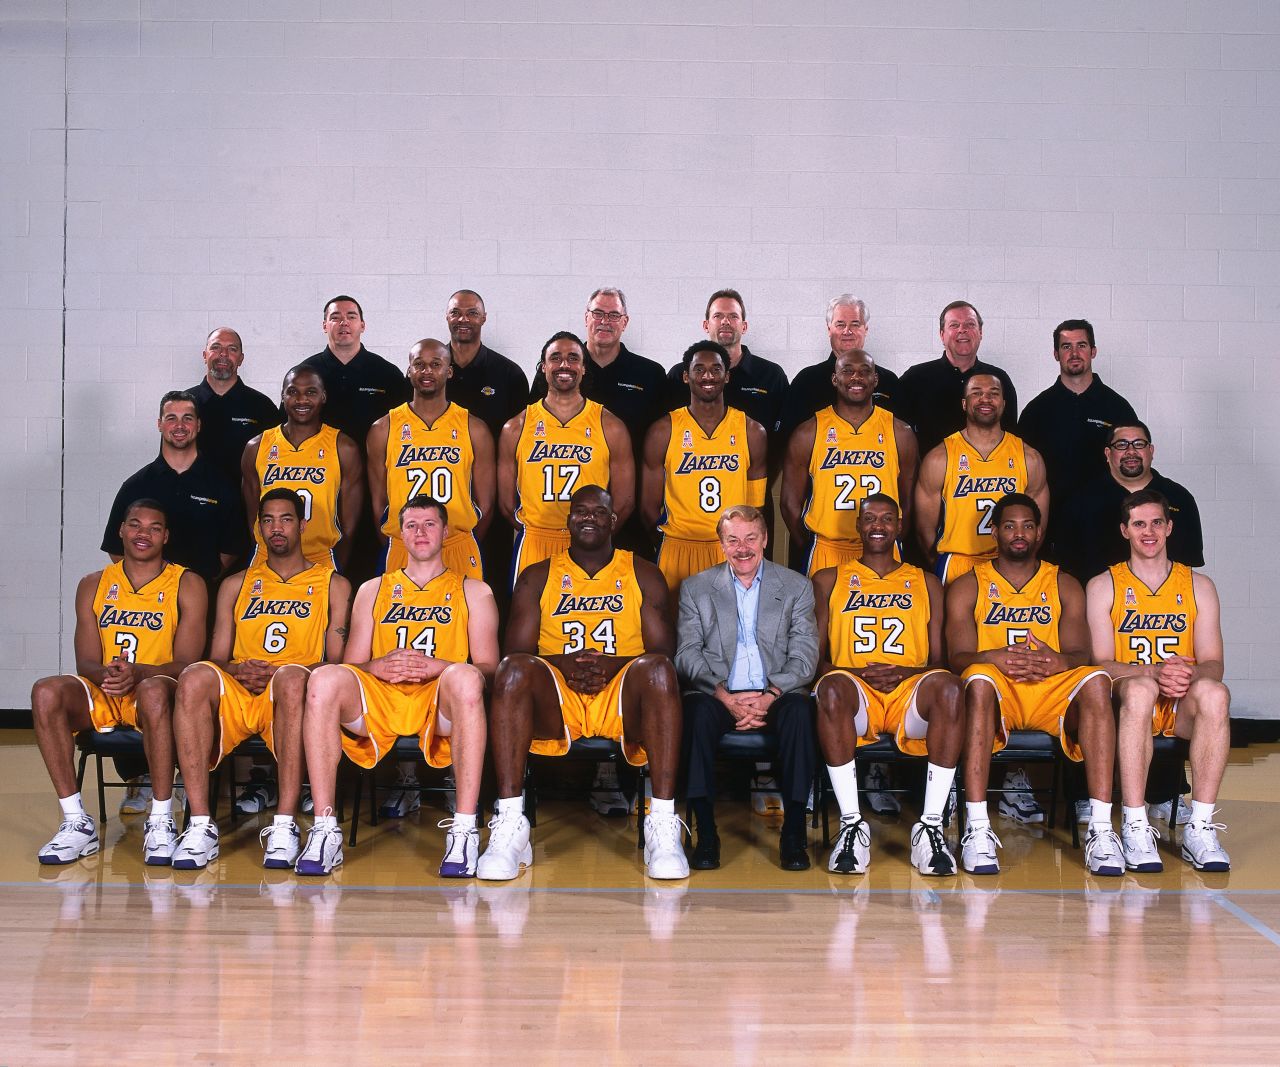 Not only did Buss' Lakers win their third-straight championship, but his Sparks racked up their second consecutive title. Pictured, the Lakers' team portrait in 2002.